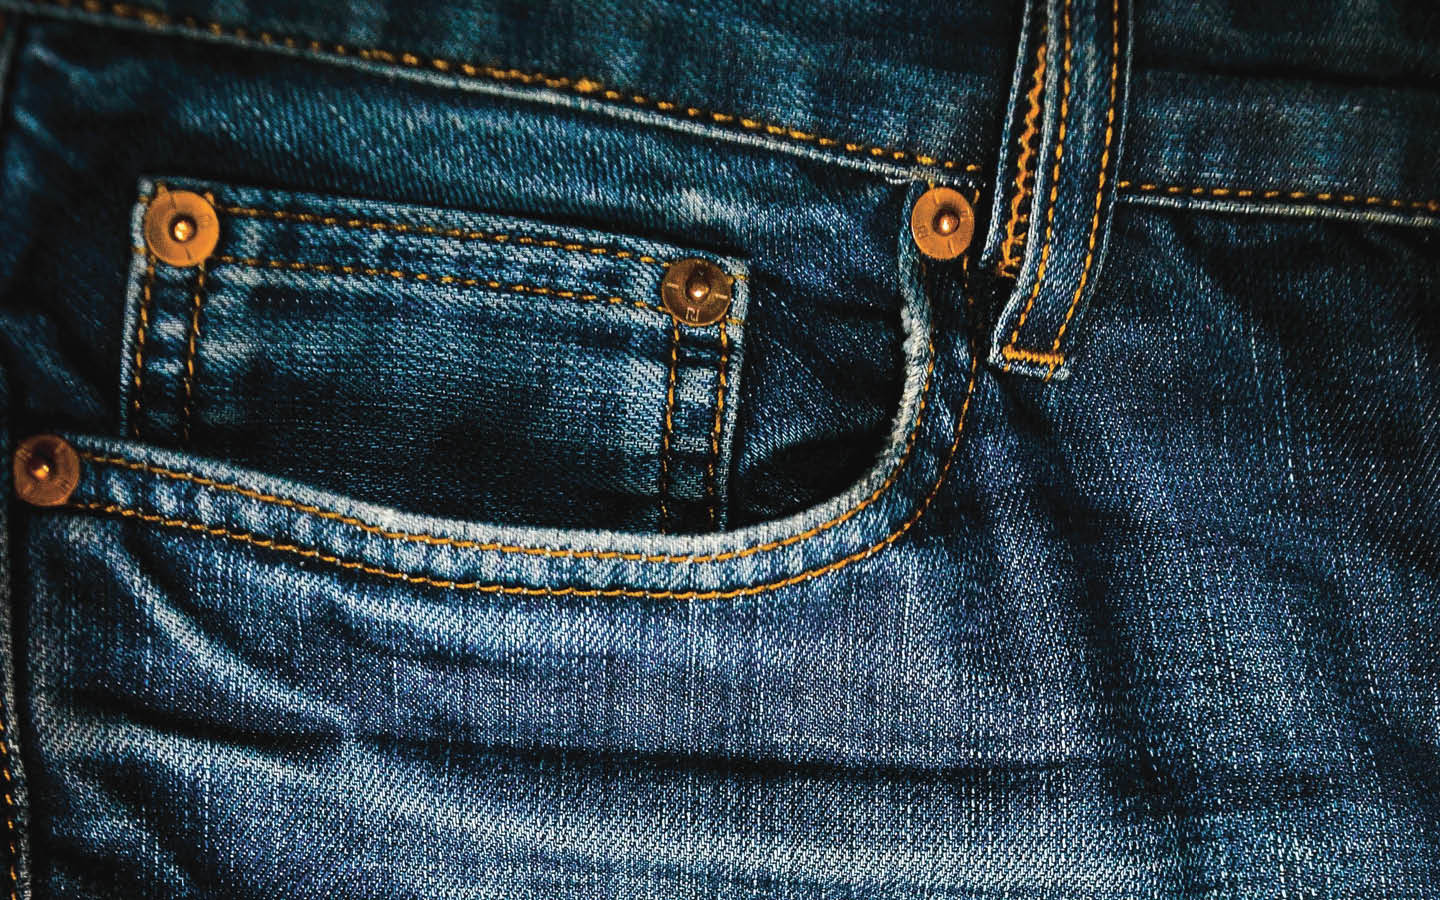 Close-up photo of the pocket of a pair of jeans